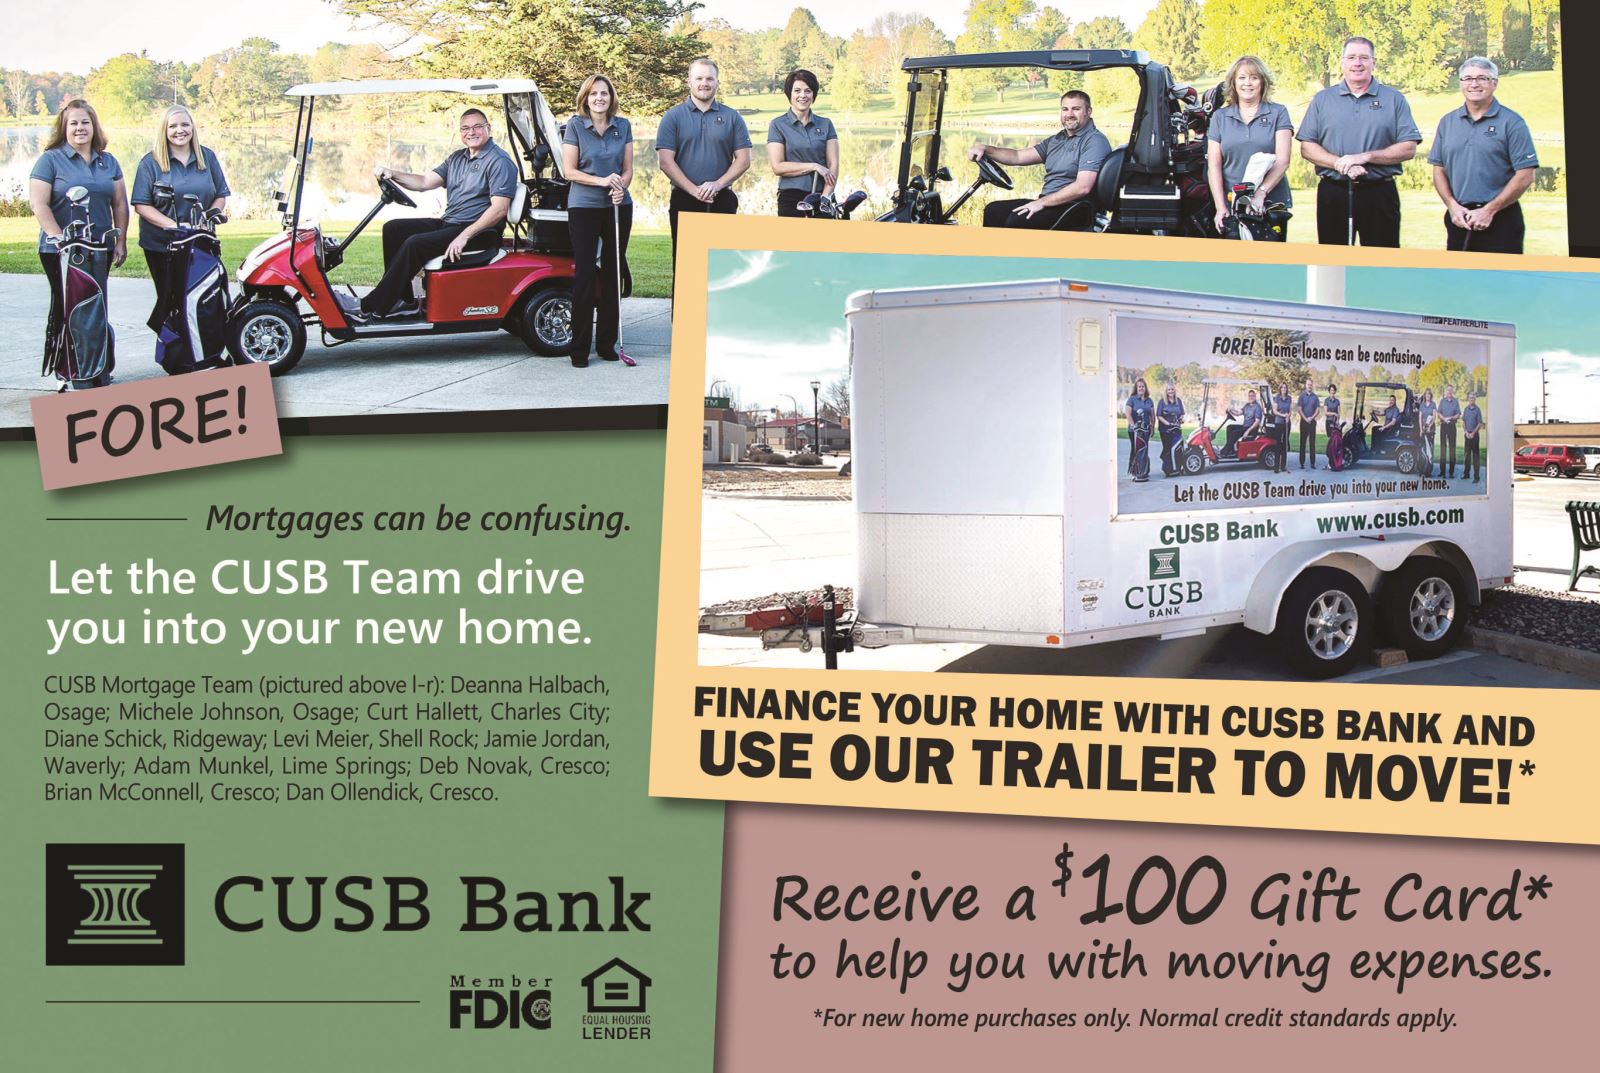 Finance your home with CUSB and use our trailer to move!